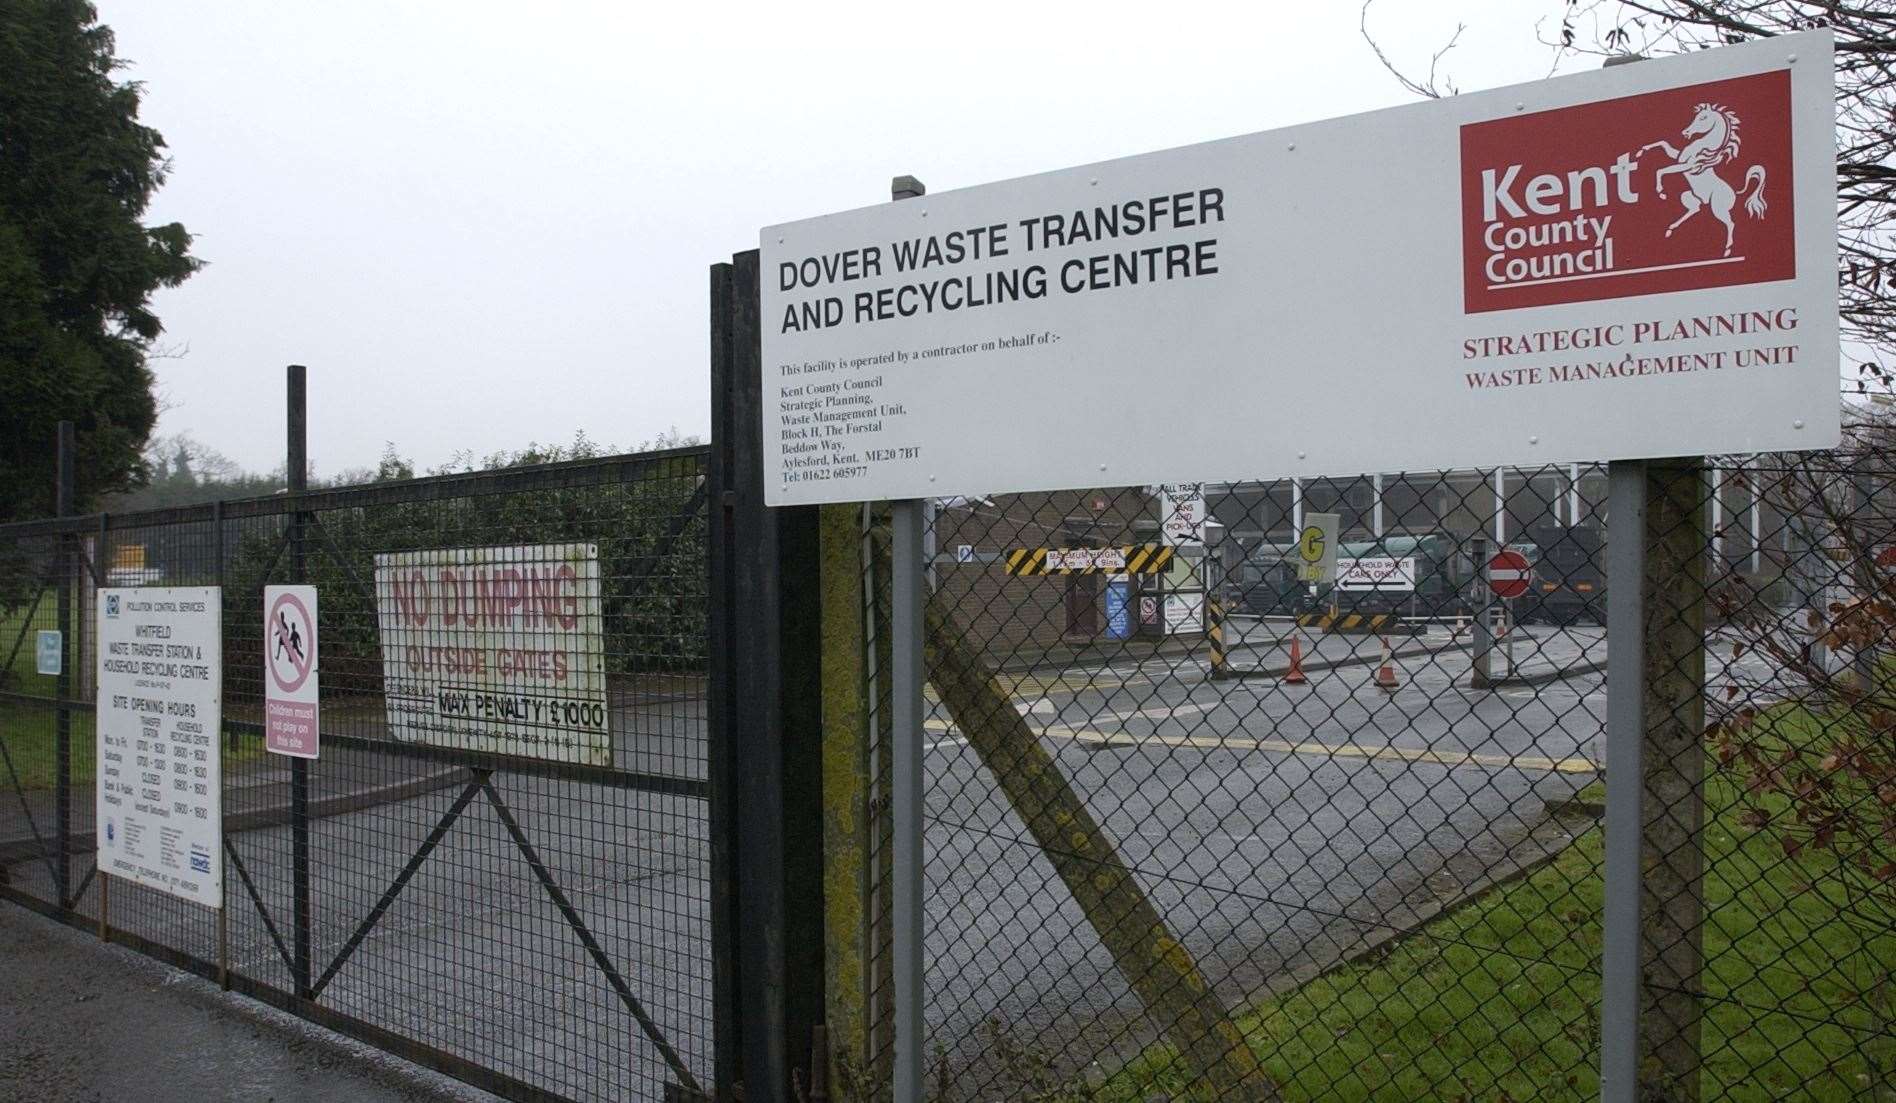 Dover Waste Transfer and Recycling Centre